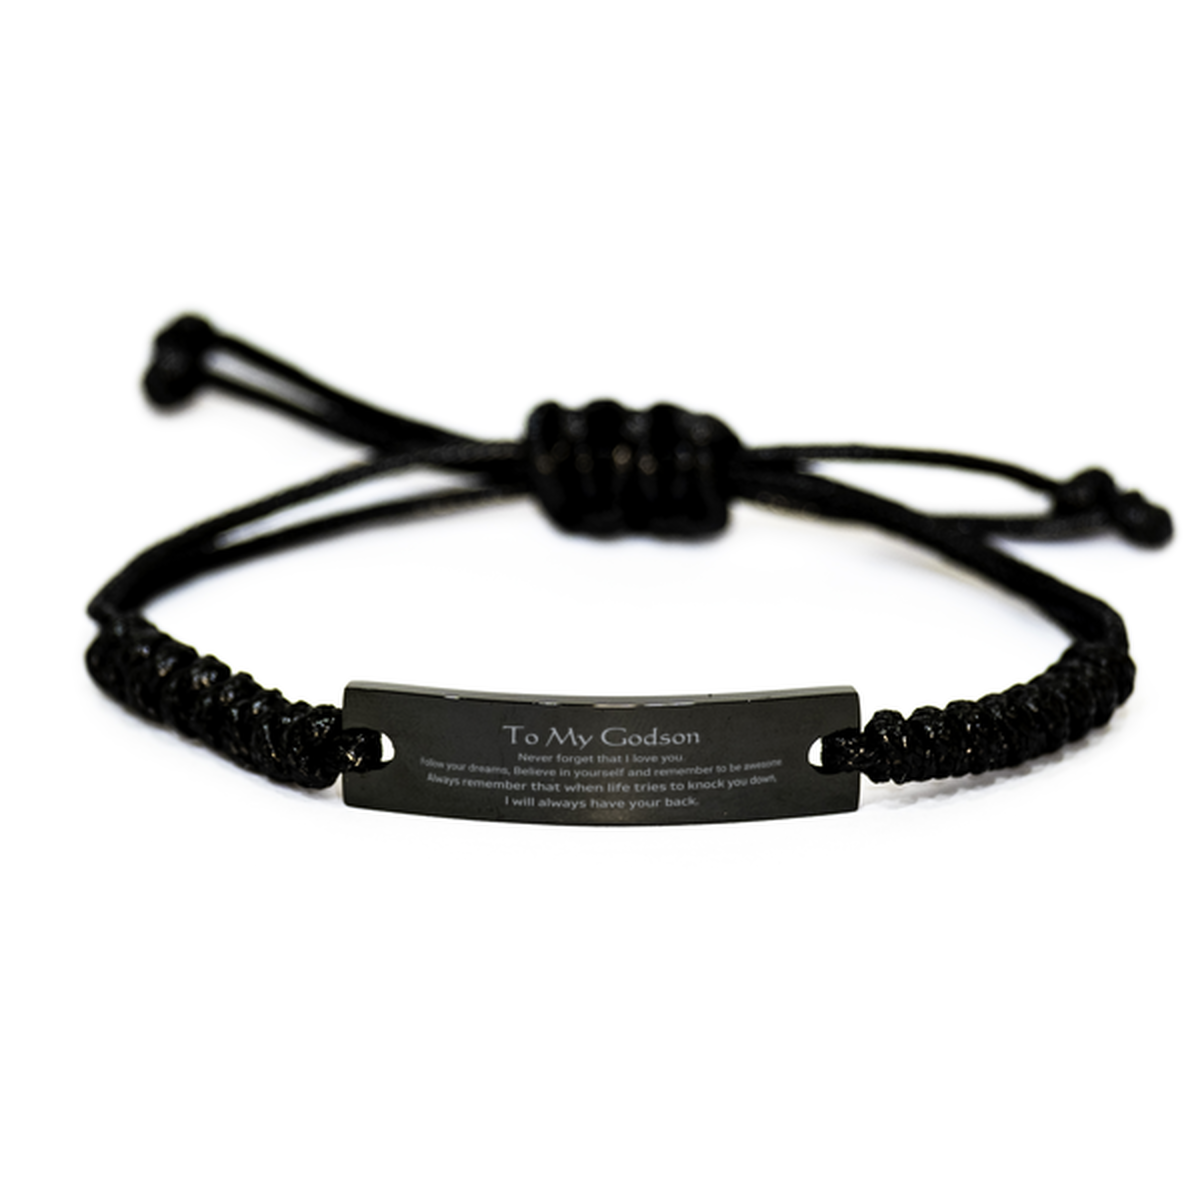 Inspirational Gifts for Godson, Follow your dreams, Believe in yourself, Godson Black Rope Bracelet, Birthday Christmas Unique Gifts For Godson